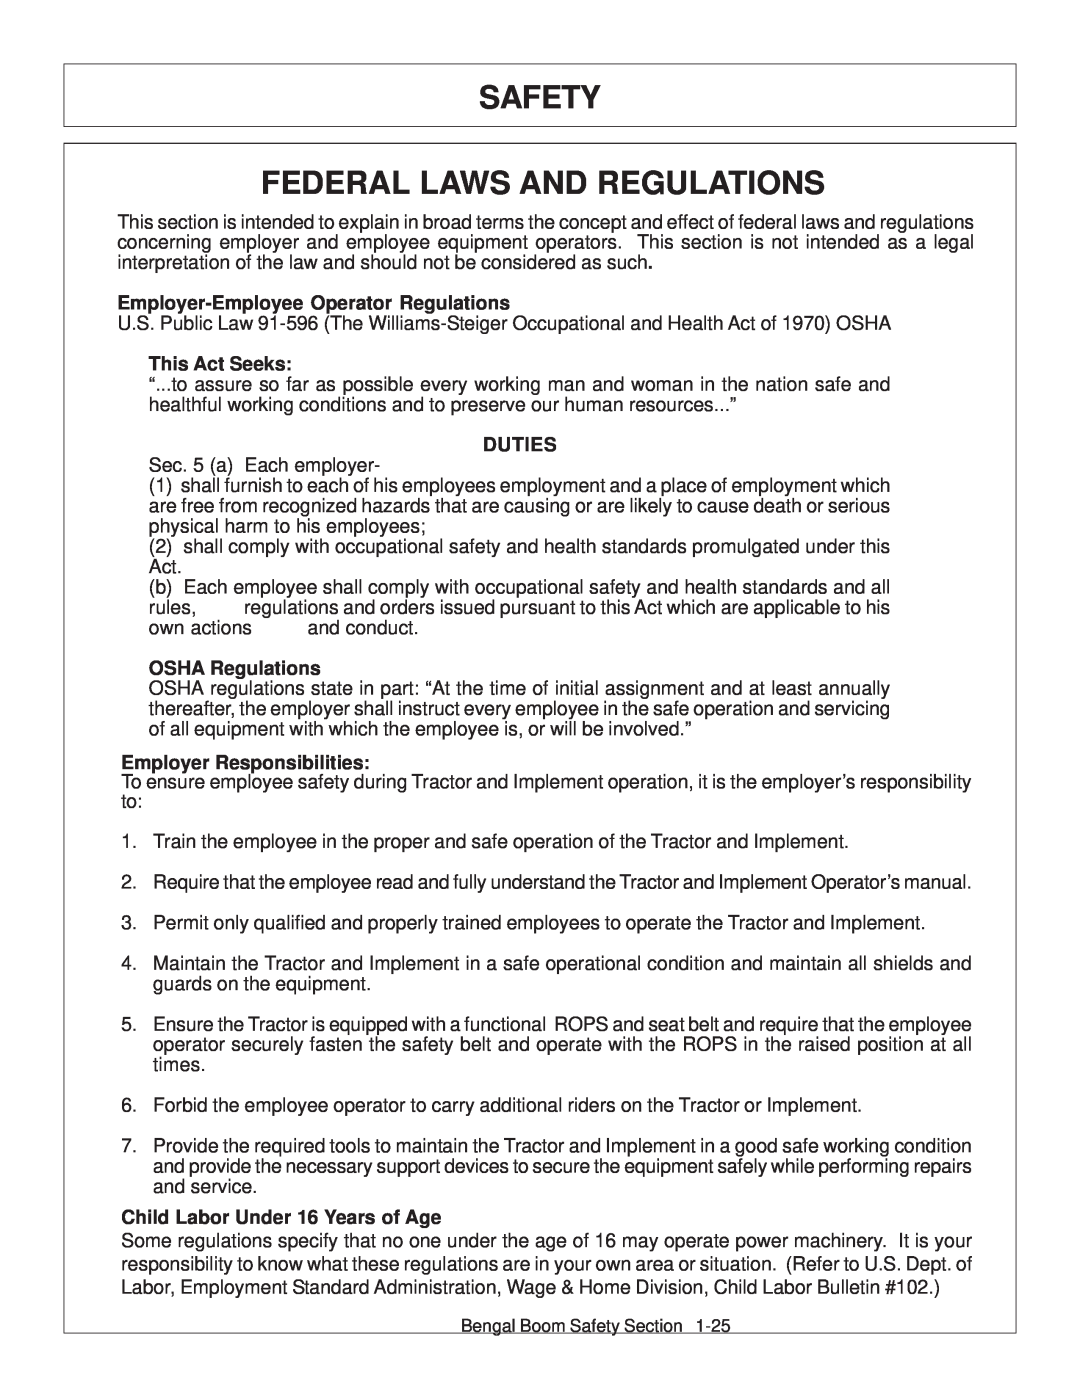 Tiger Products Co., Ltd 5093E Safety Federal Laws And Regulations, Employer-EmployeeOperator Regulations, This Act Seeks 